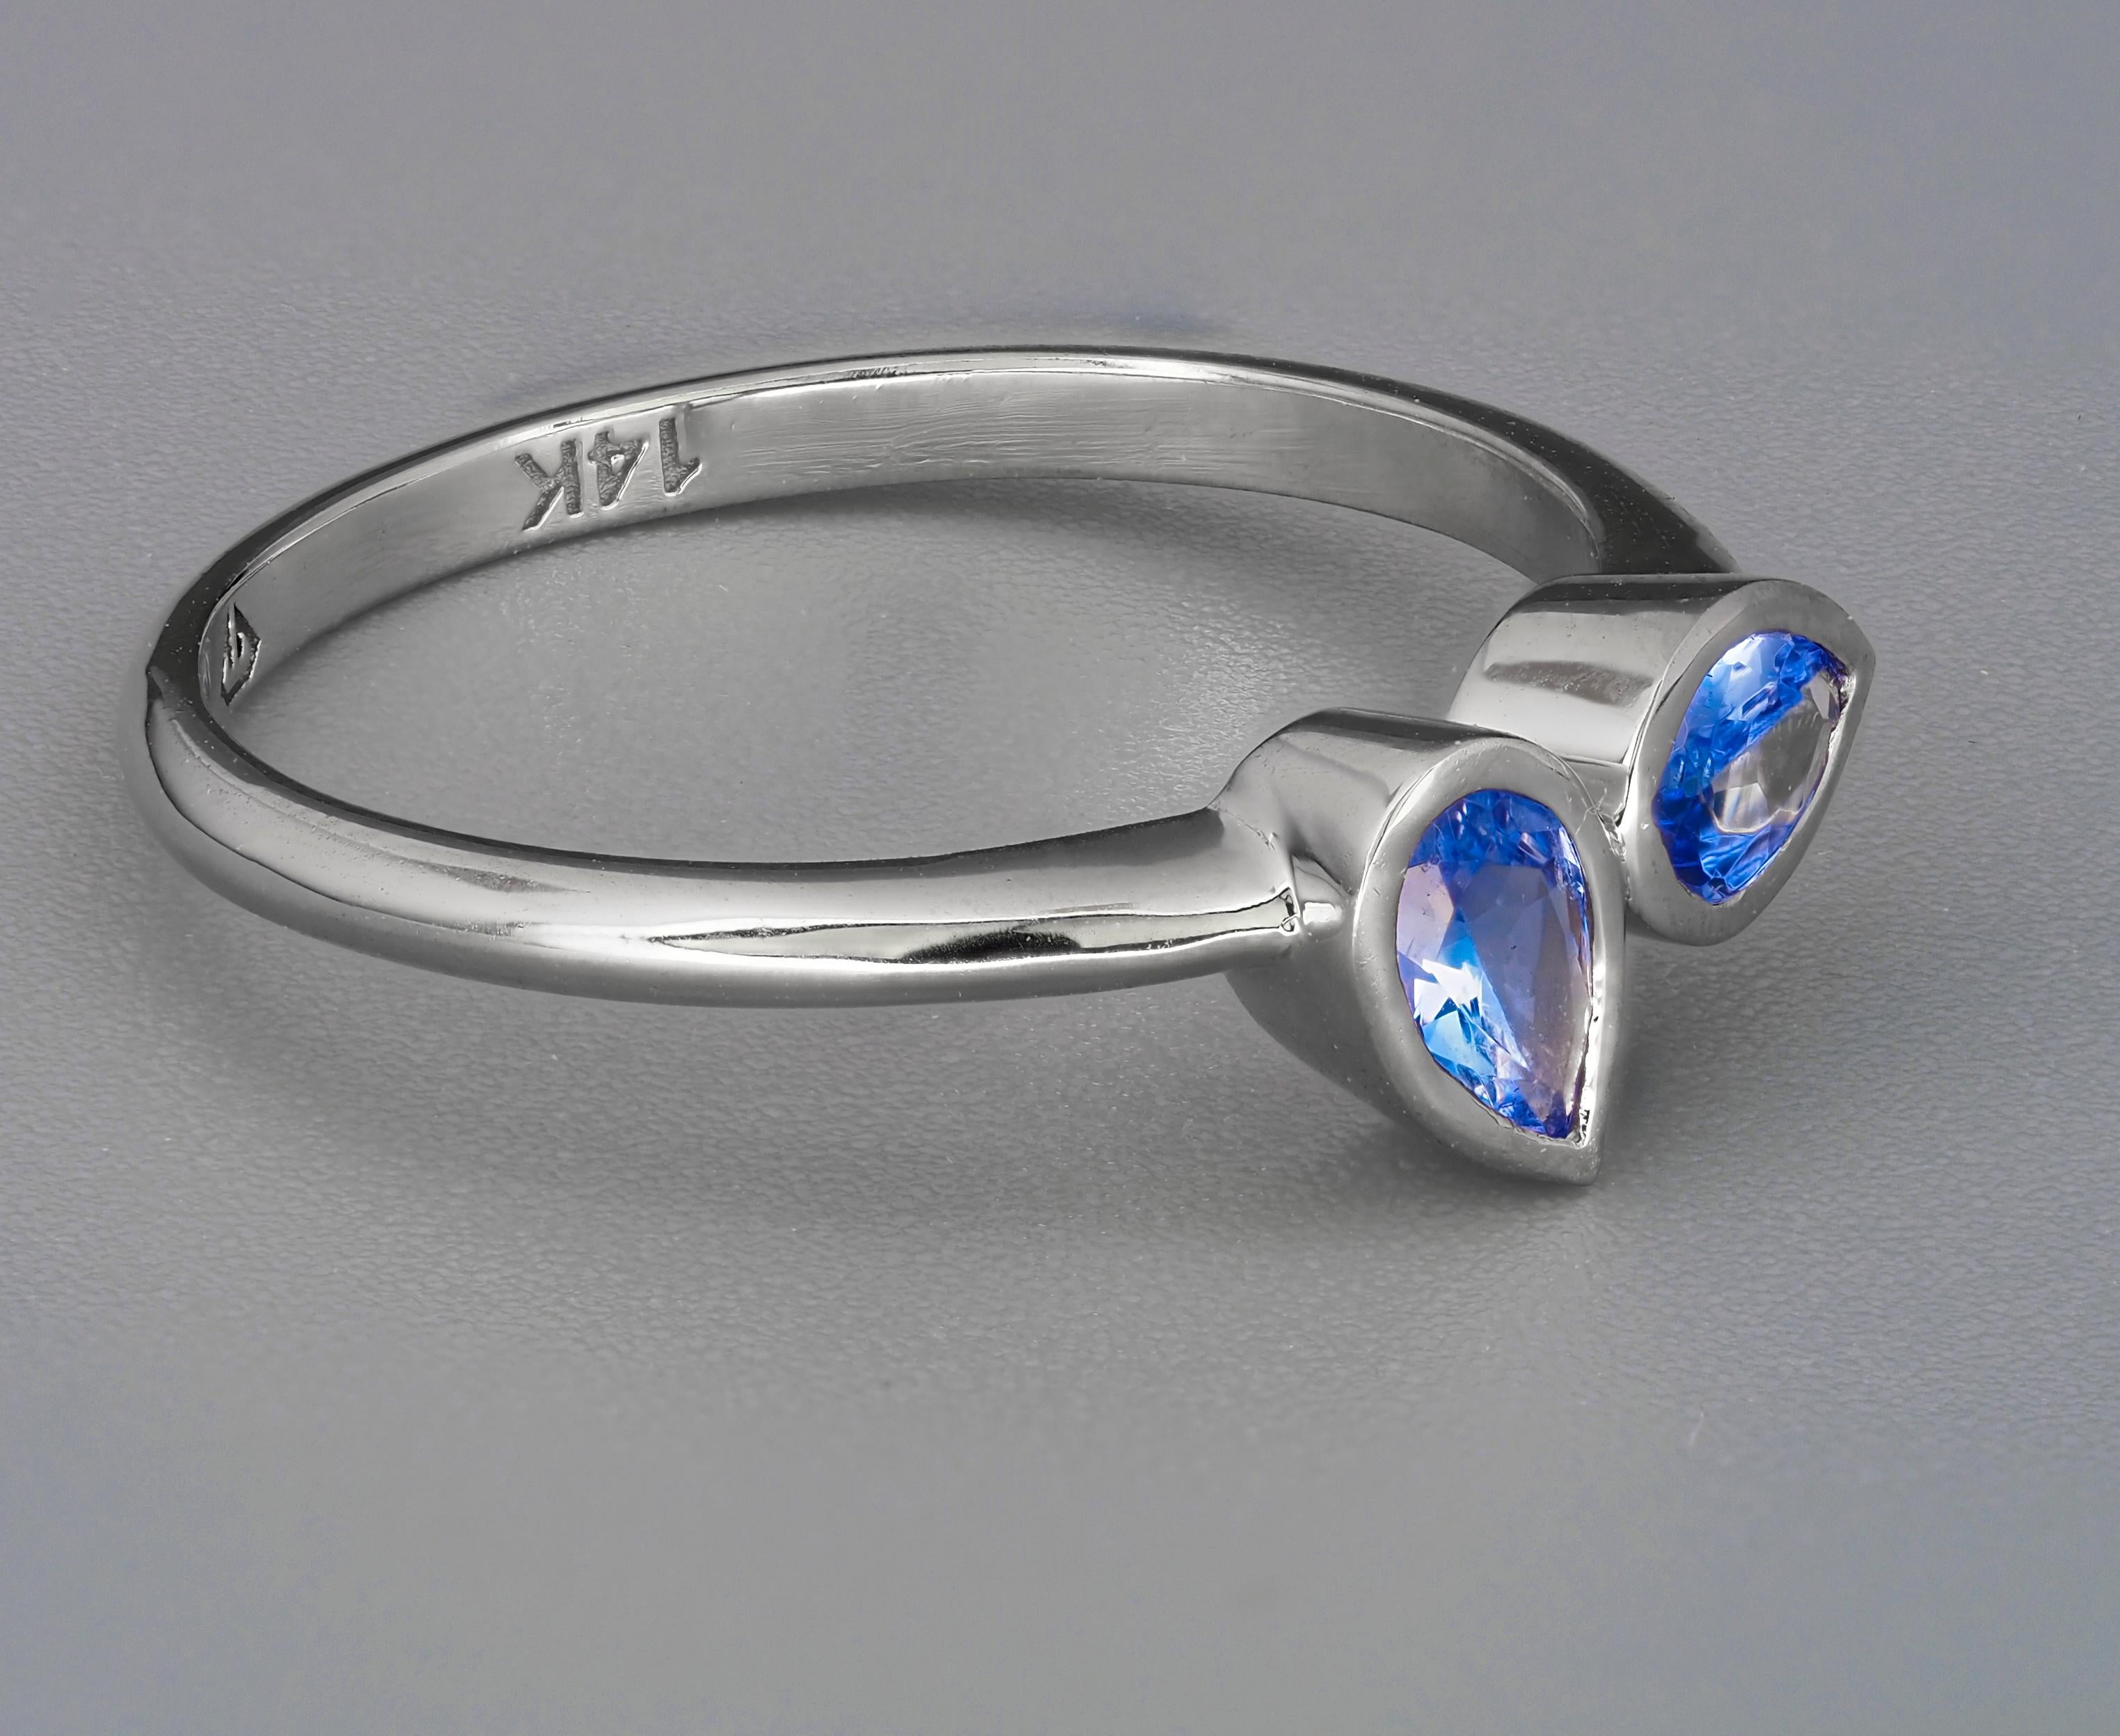 14 k solid gold ring with natural tanzanites. December birthstone.
Weight: 1.85 g.

Central stones: 2 pieces natural tanzanites
Cut: Pears
Weight: approx 0.95 ct. (5 x 4 mm each stone)
Color: Light blue
Clarity: Transparent with inclusions.

auct